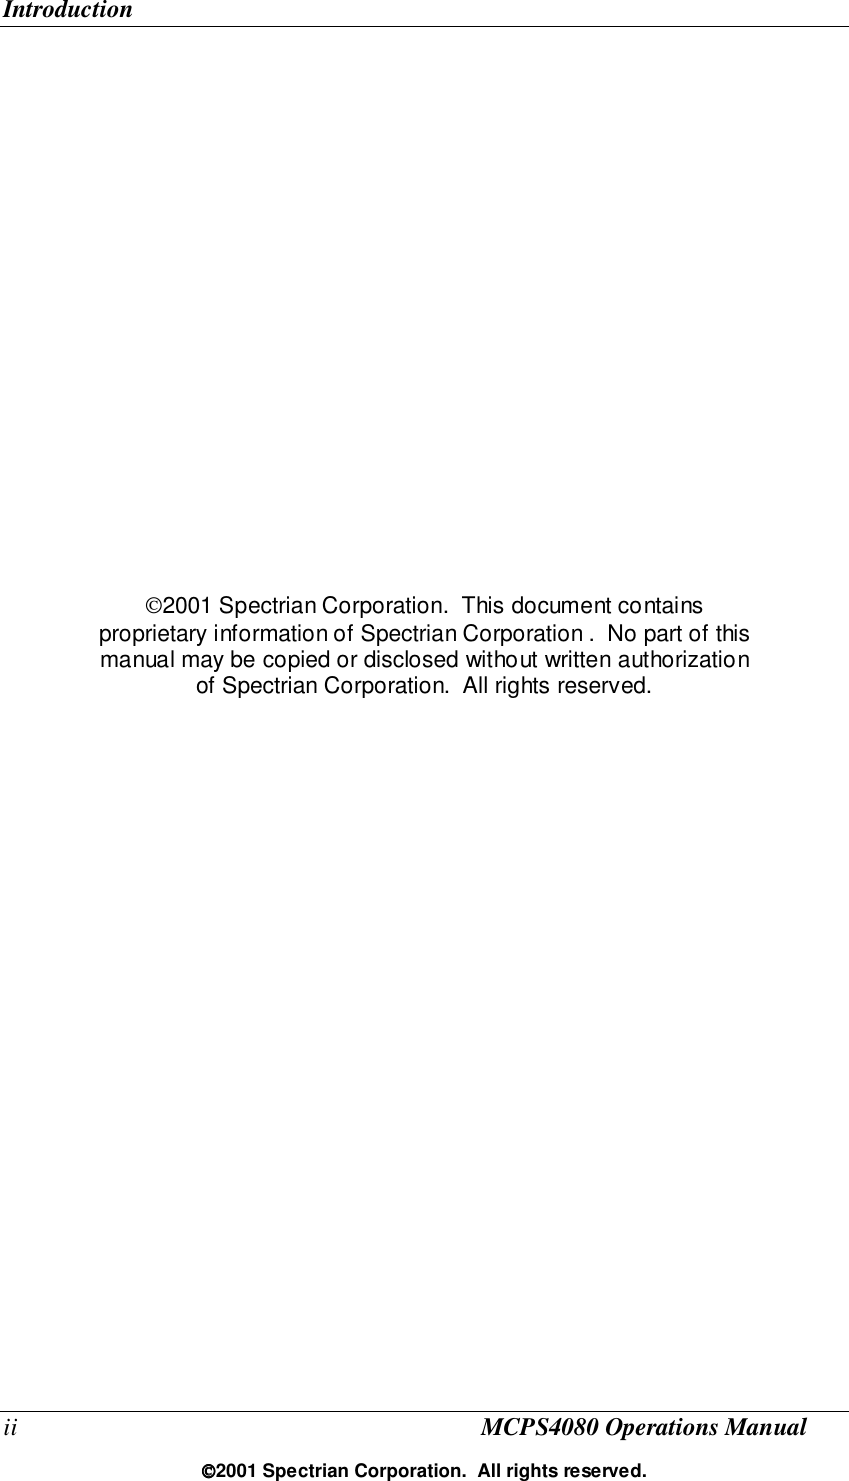 Introductionii MCPS4080 Operations Manual2001 Spectrian Corporation.  All rights reserved.2001 Spectrian Corporation.  This document containsproprietary information of Spectrian Corporation .  No part of thismanual may be copied or disclosed without written authorizationof Spectrian Corporation.  All rights reserved.